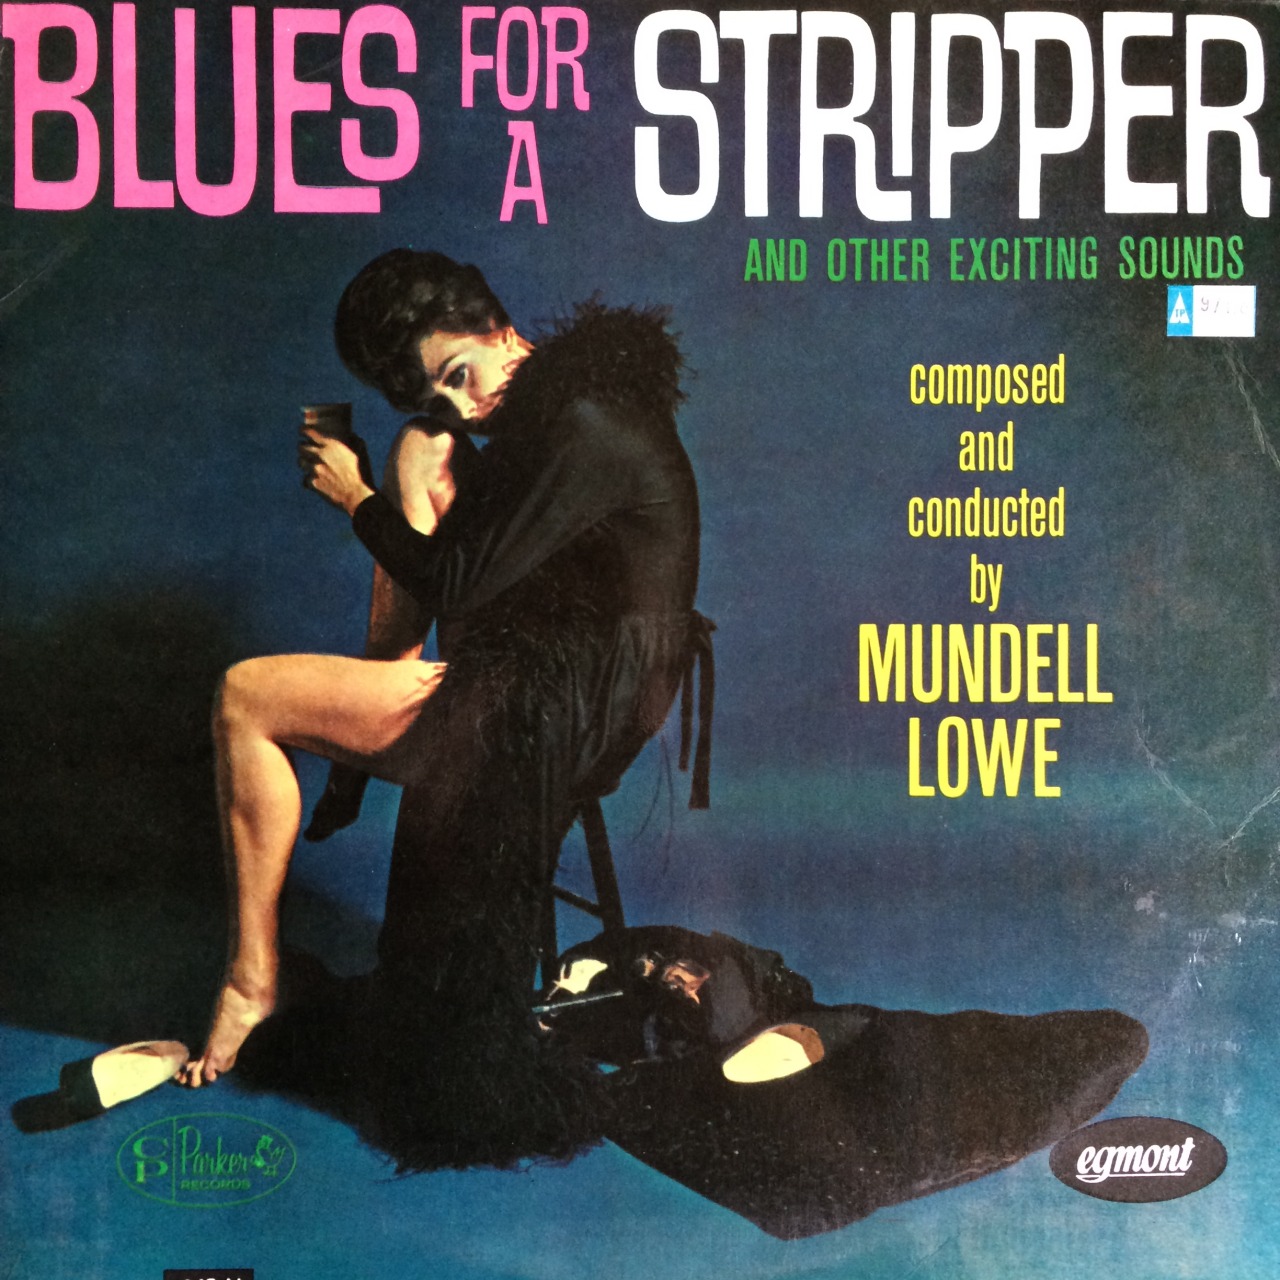 Blues For A Stripper, by Mundell Lowe (Charlie Parker, 1962). AKA Soundtrack to the